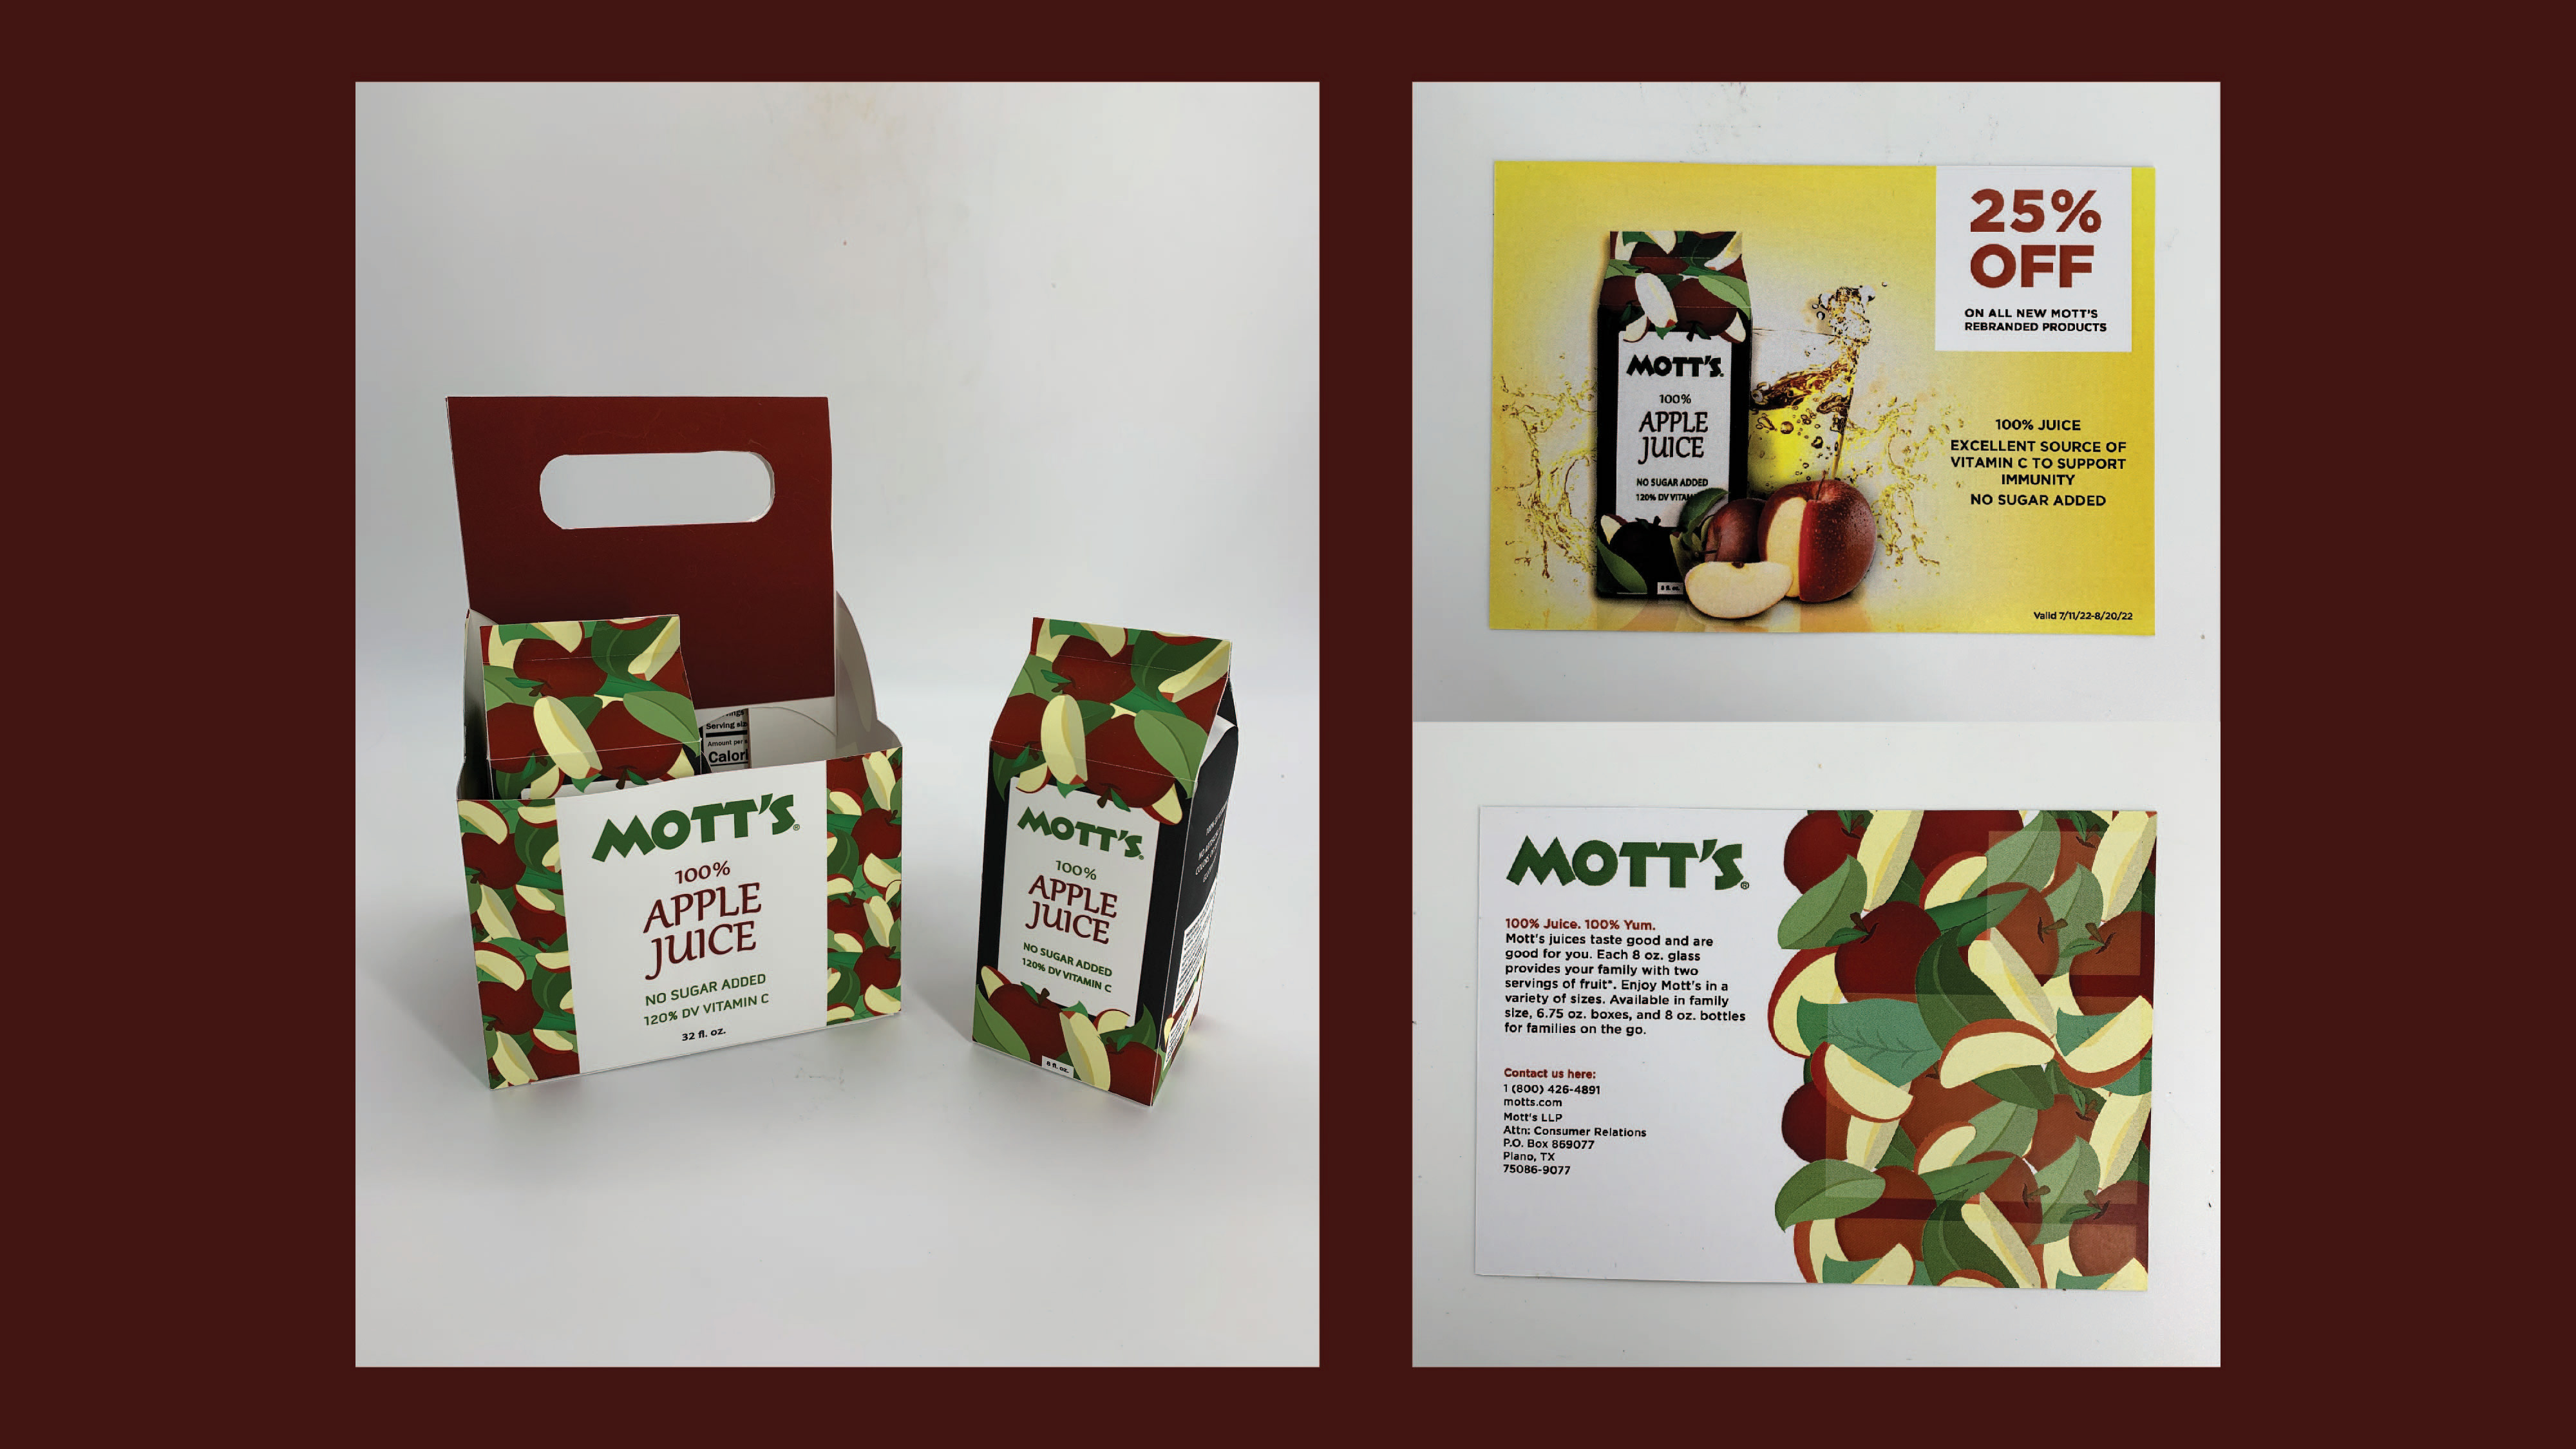 “Mott’s Apple Juice” / “Mott’s Apple Juice,” Juice box and Carrier package redesign, printed paper product, 2”x3” inches print ad mailer, 2022.